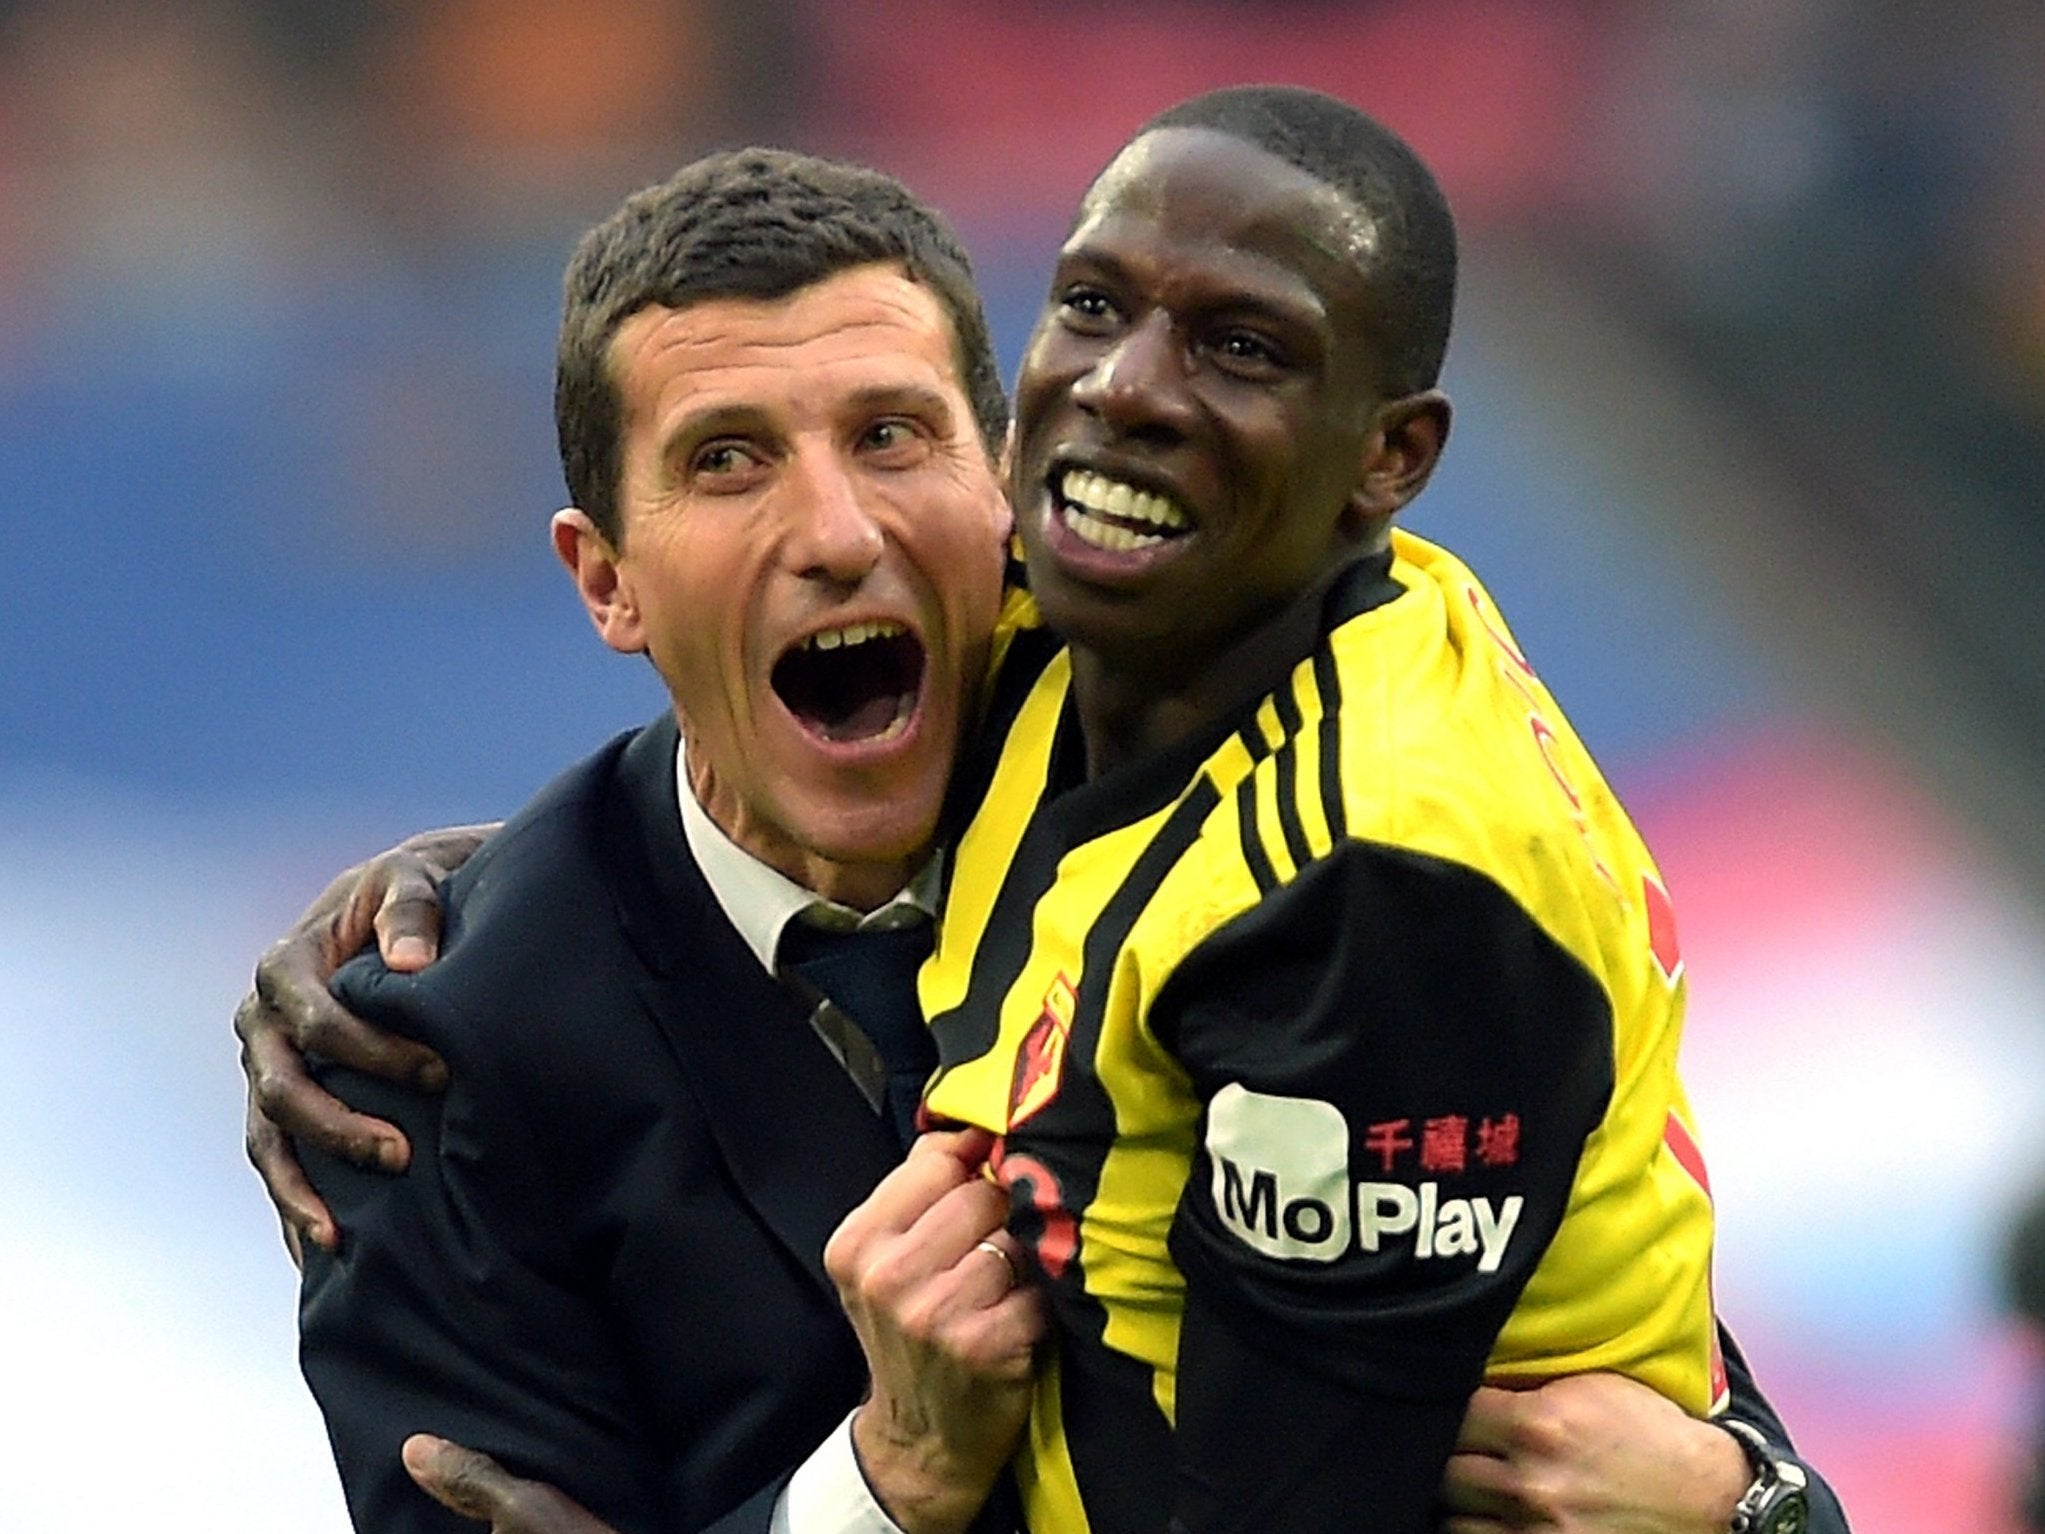 Watford head coach Javi Gracia celebrates together with Abdoulaye Doucoure